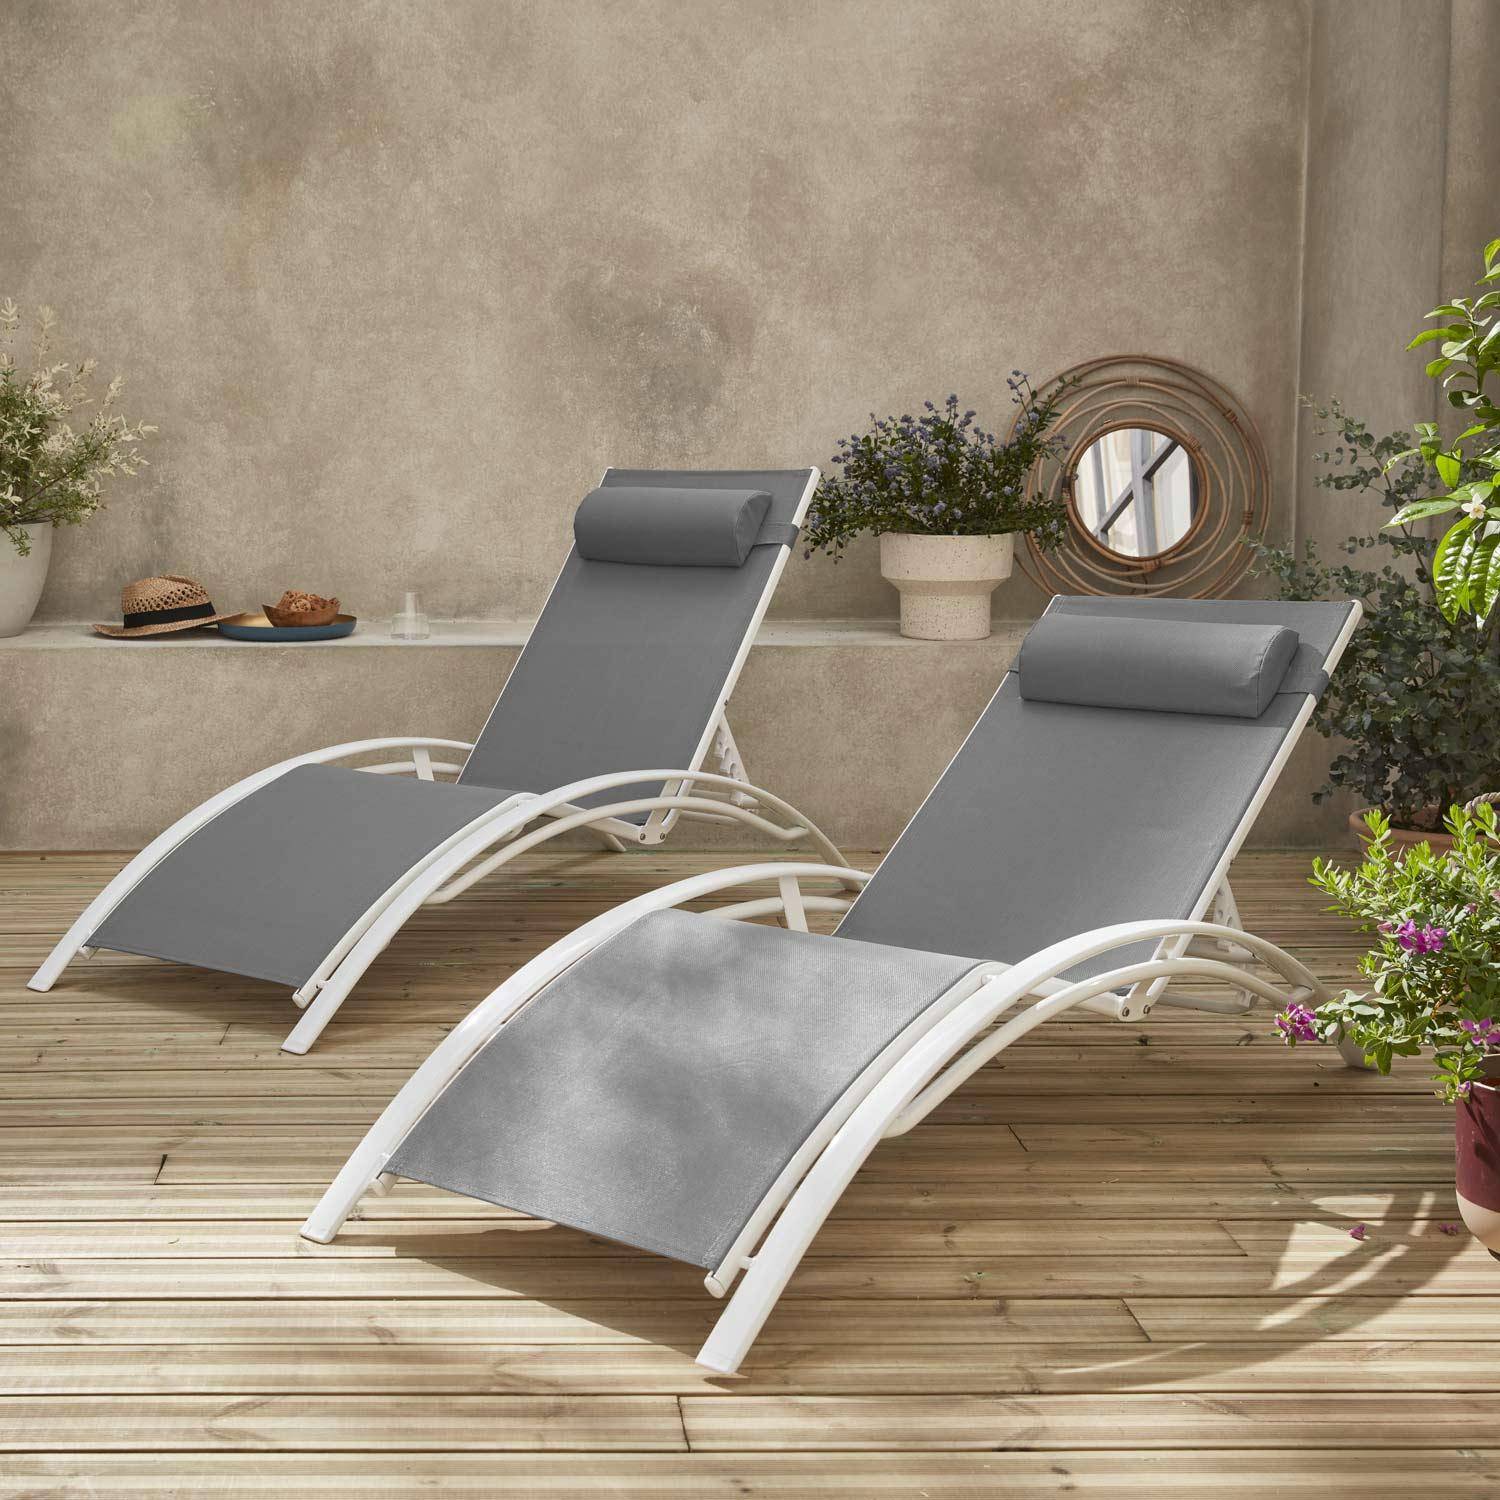 Pair of aluminium and textilene sun loungers, 4 reclining positions, headrest included, stackable - Louisa - White frame, Grey textilene,sweeek,Photo2